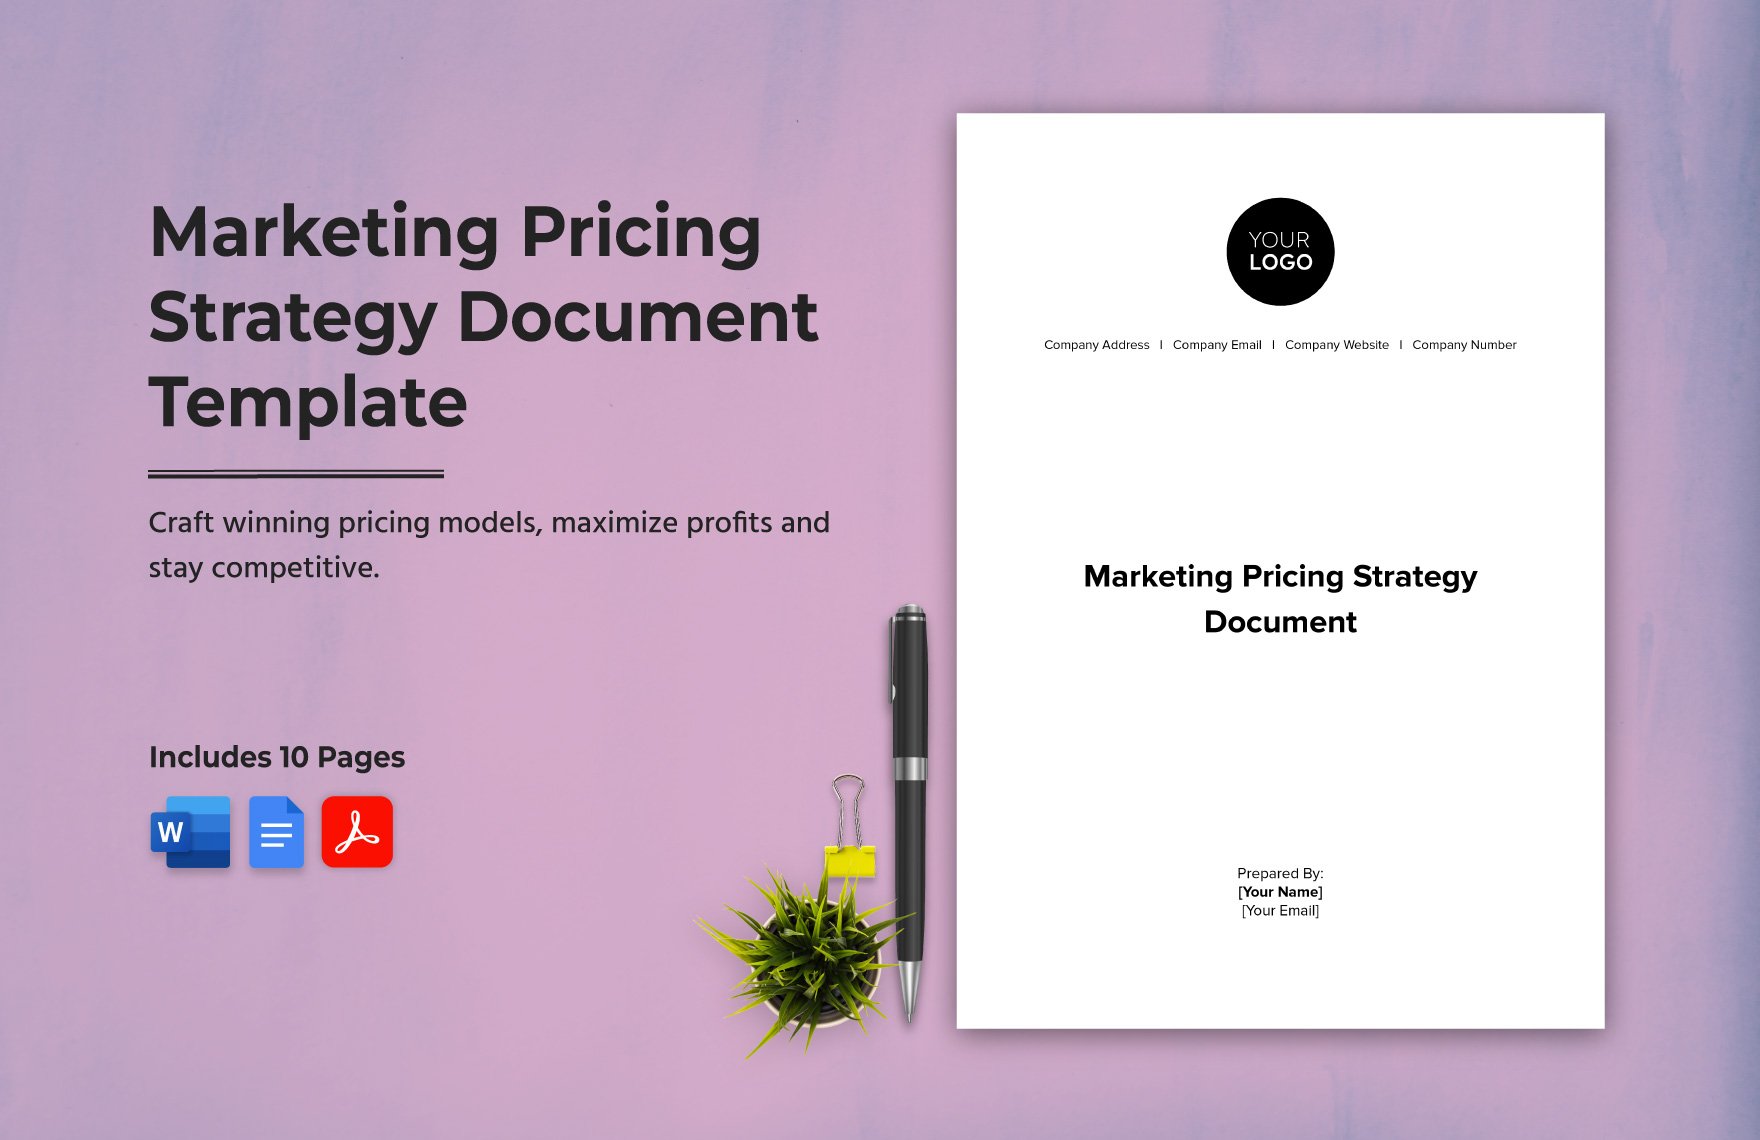 Marketing Pricing Strategy Document Template